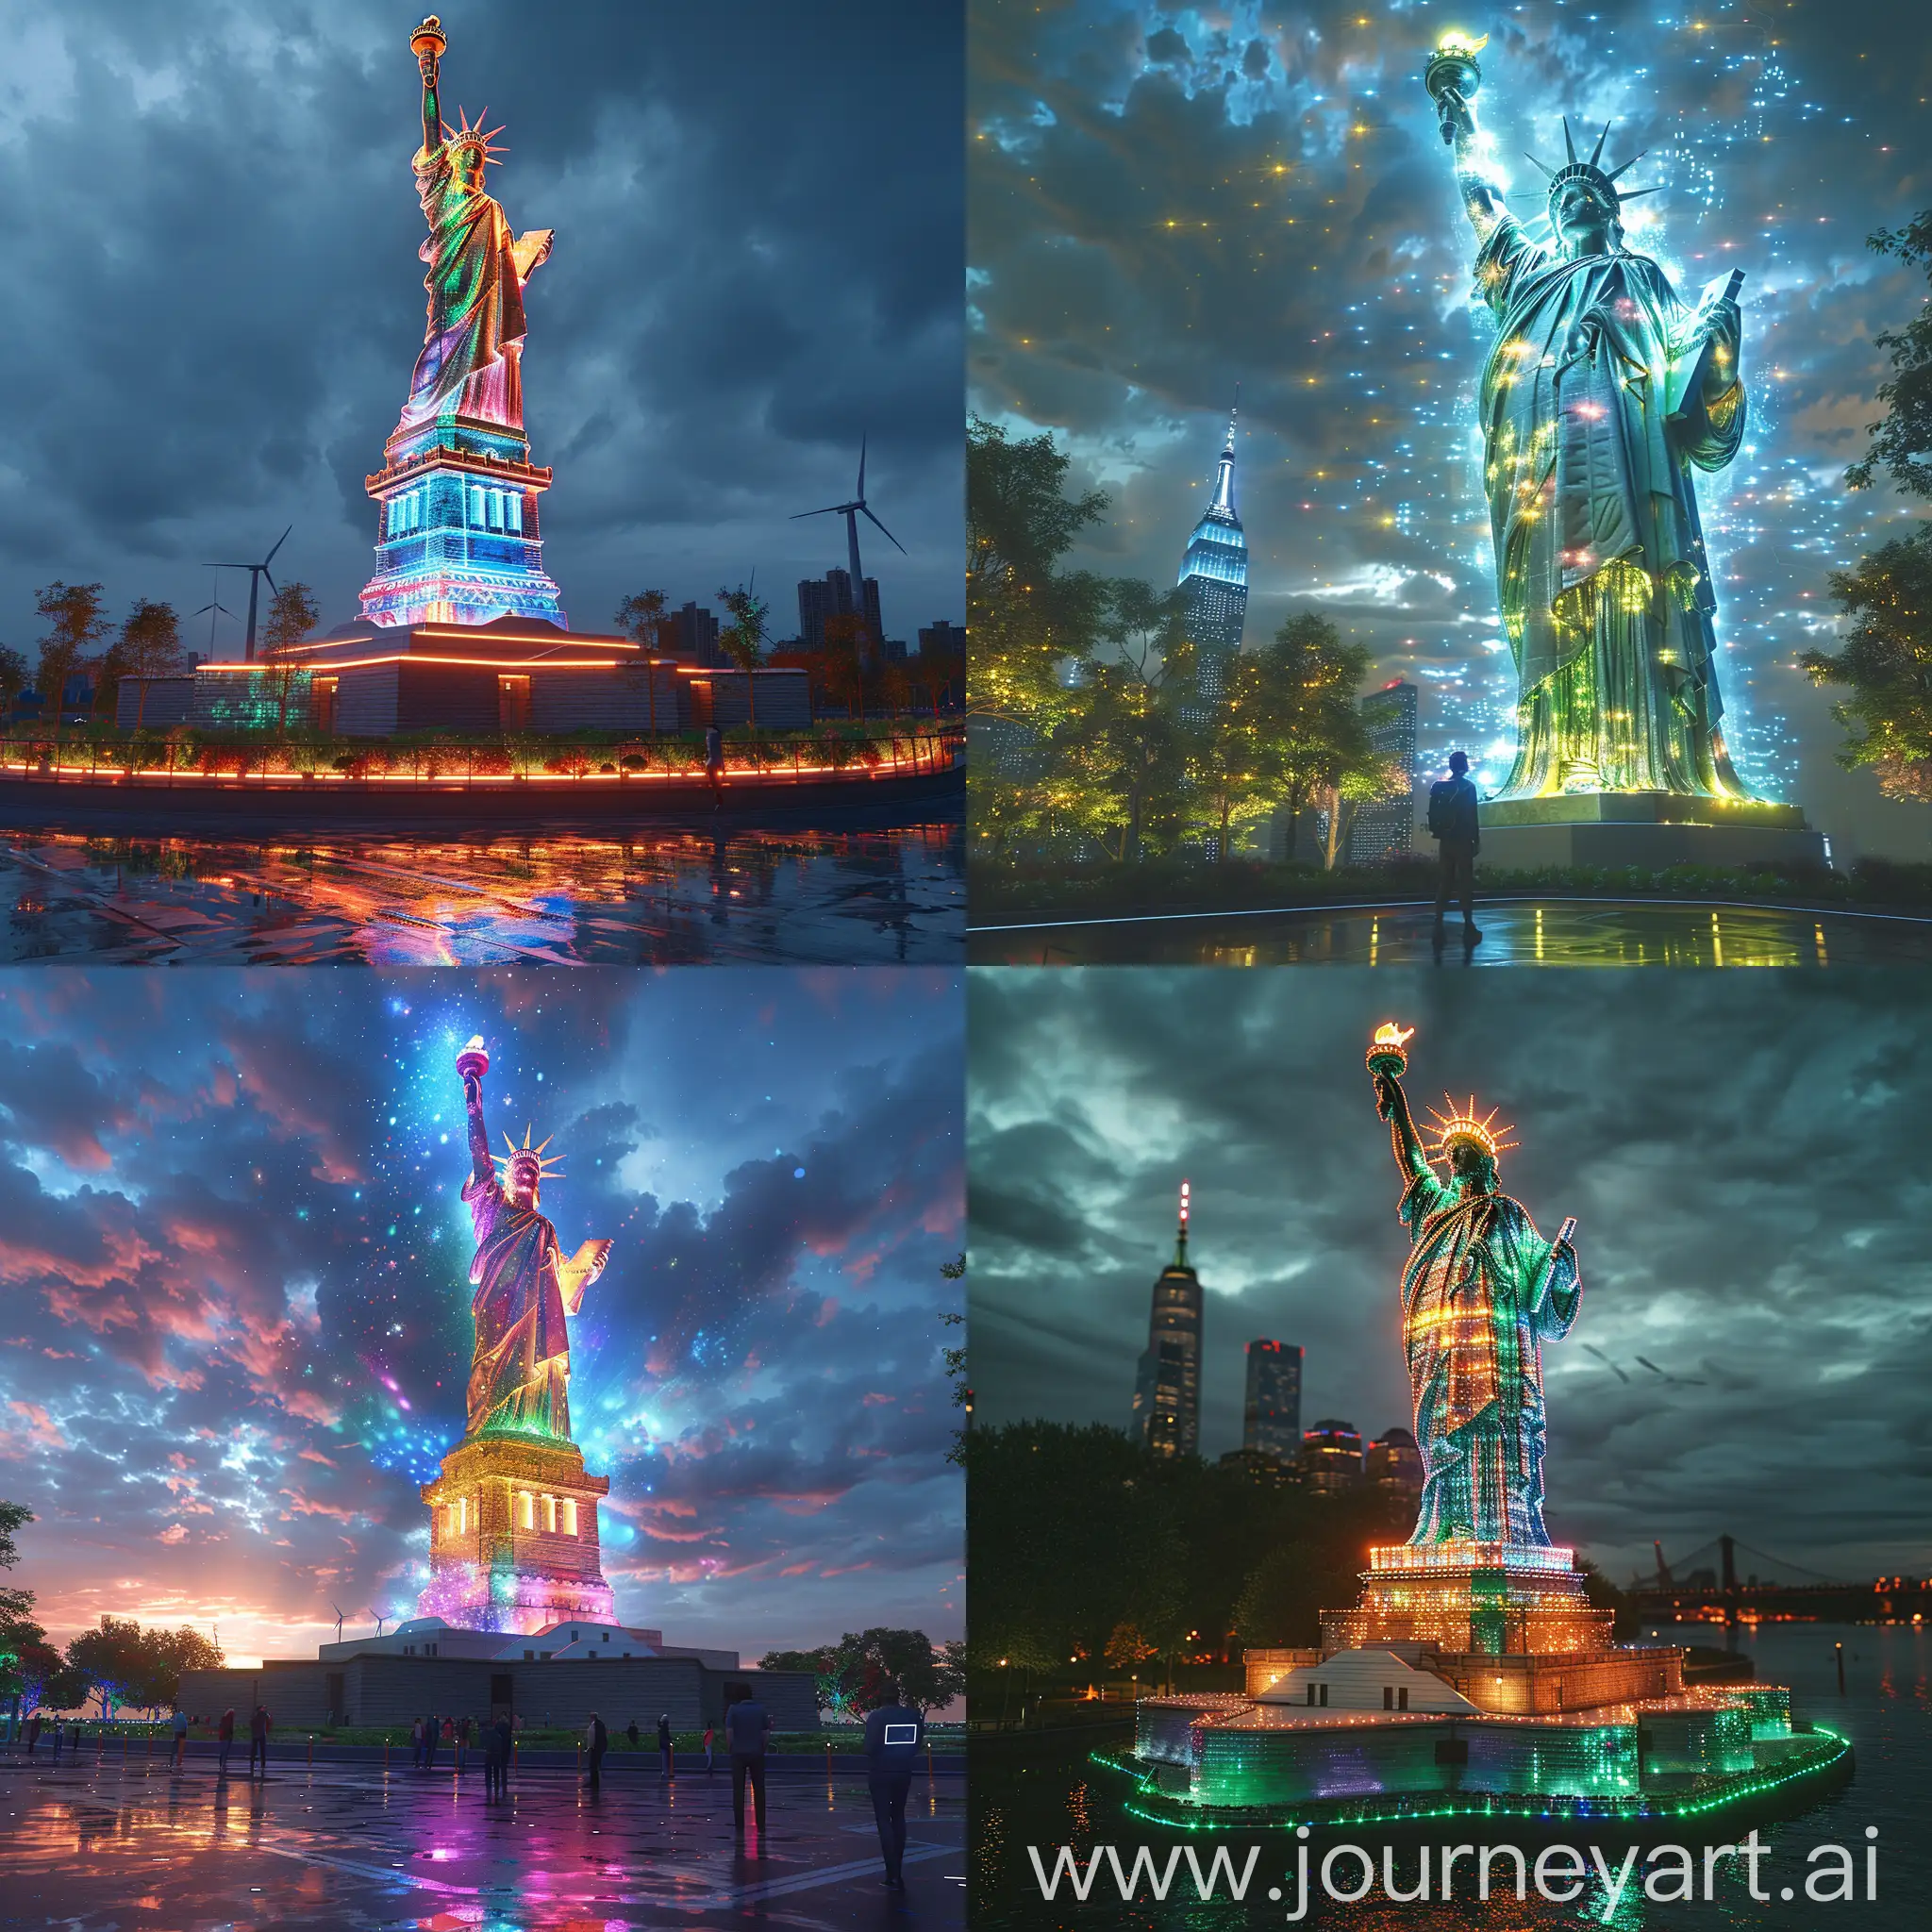 Futuristic Statue Of Liberty, Interactive LED Light Display, Holographic Projection, Drone Landing Pads, Augmented Reality Tours, Robotic Guardians, Solar Panels Integration, Hyperloop Transportation Hub, Wind Turbines, Aquaponic Gardens, Self-Cleaning Nanotechnology, Green Roof, Rainwater Harvesting System, Vertical Gardens, Recycled Materials, Energy-Efficient Lighting, Water Purification System, Waste Management System, Low-Emission Transportation, Sustainable Architecture, Educational Exhibits, Reinforced Steel Structure, Shock-Absorbing Foundation, Bulletproof Glass, Anti-Corrosion Coating, Flexible Joints, Resilient Cladding Materials, Blast-Resistant Design, Seismic Dampers, Reinforced Concrete Core, Emergency Evacuation Systems, octane render --stylize 1000